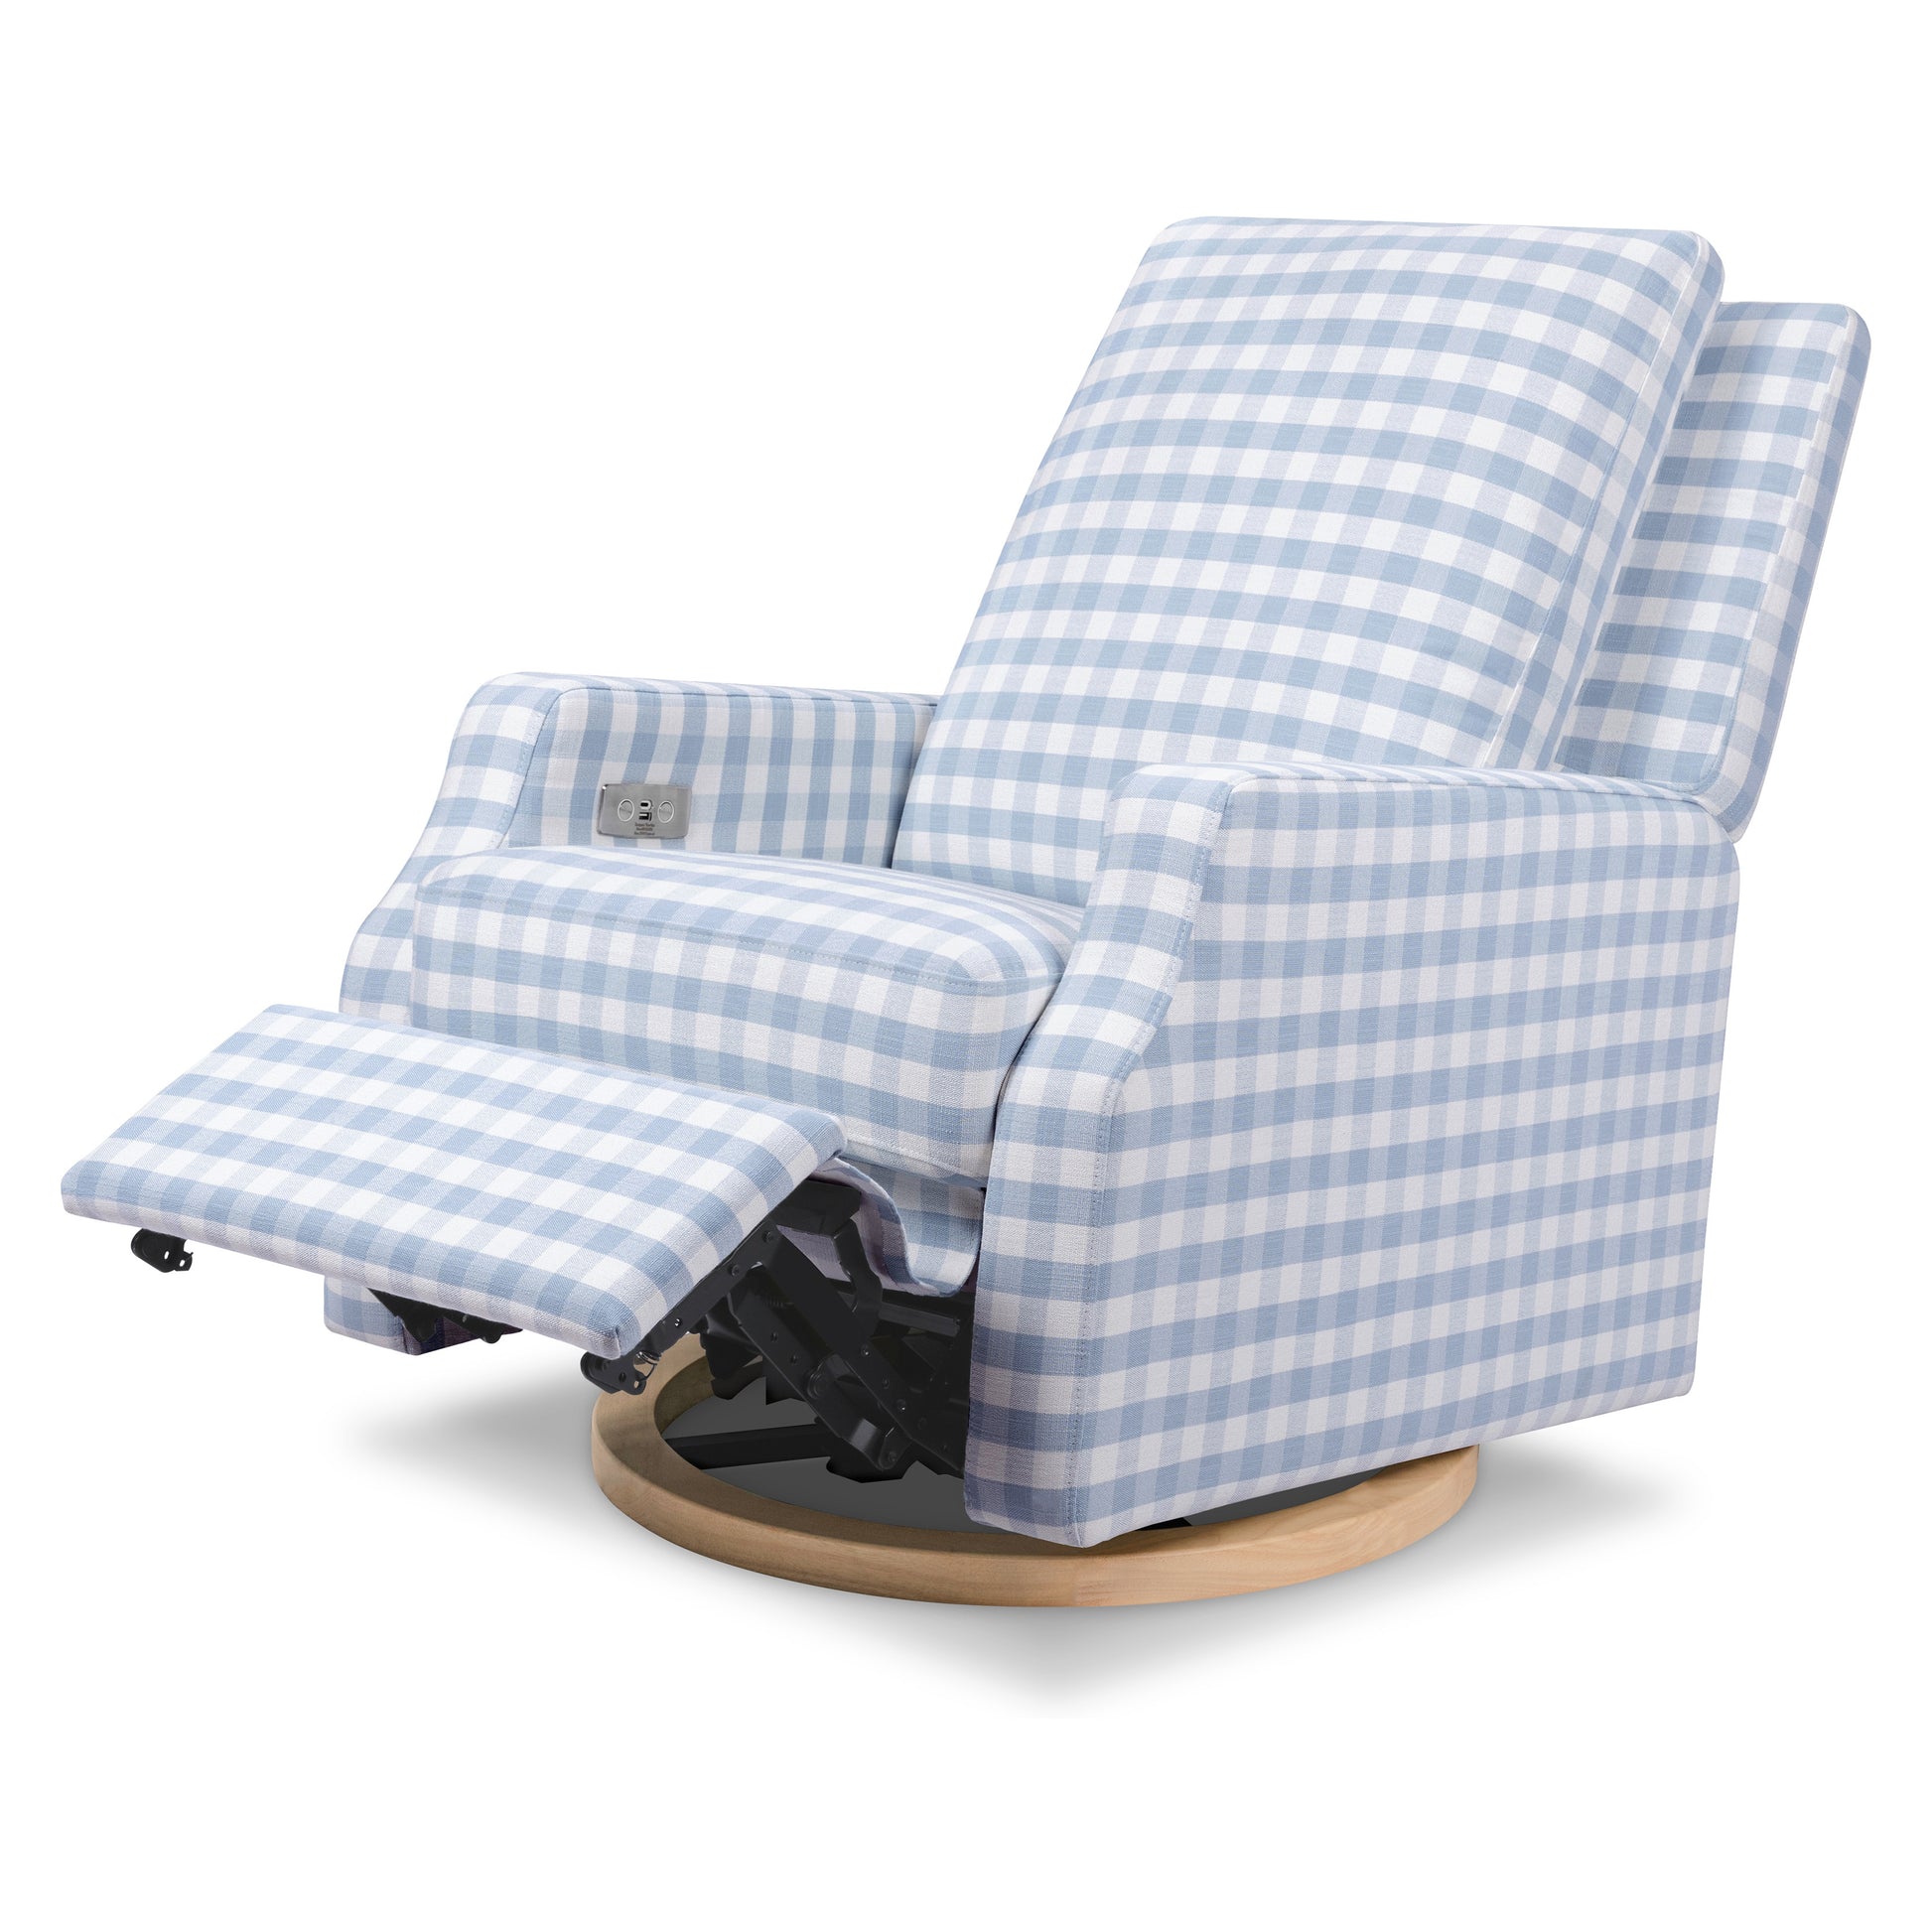 M22286BGHLB,Crewe Electronic Swivel Glider Recliner in Blue Gingham with Light Wood Base